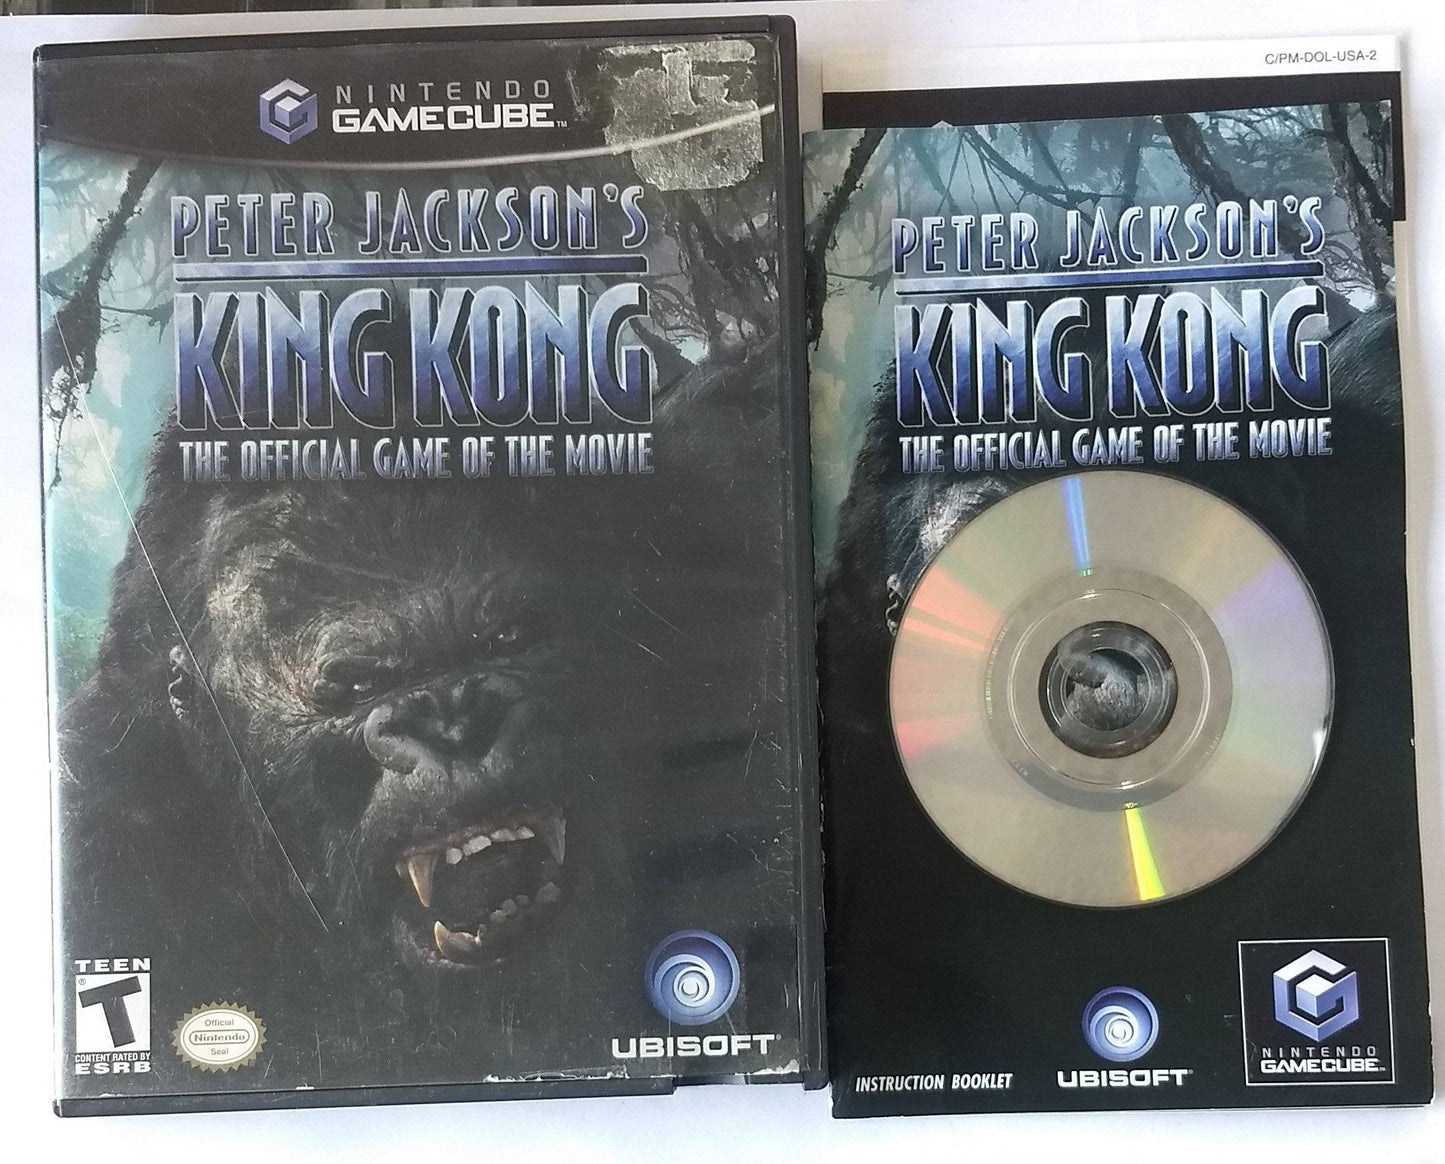 PETER JACKSON'S KING KONG THE OFFICIAL GAME OF THE MOVIE (NINTENDO GAMECUBE NGC) - jeux video game-x